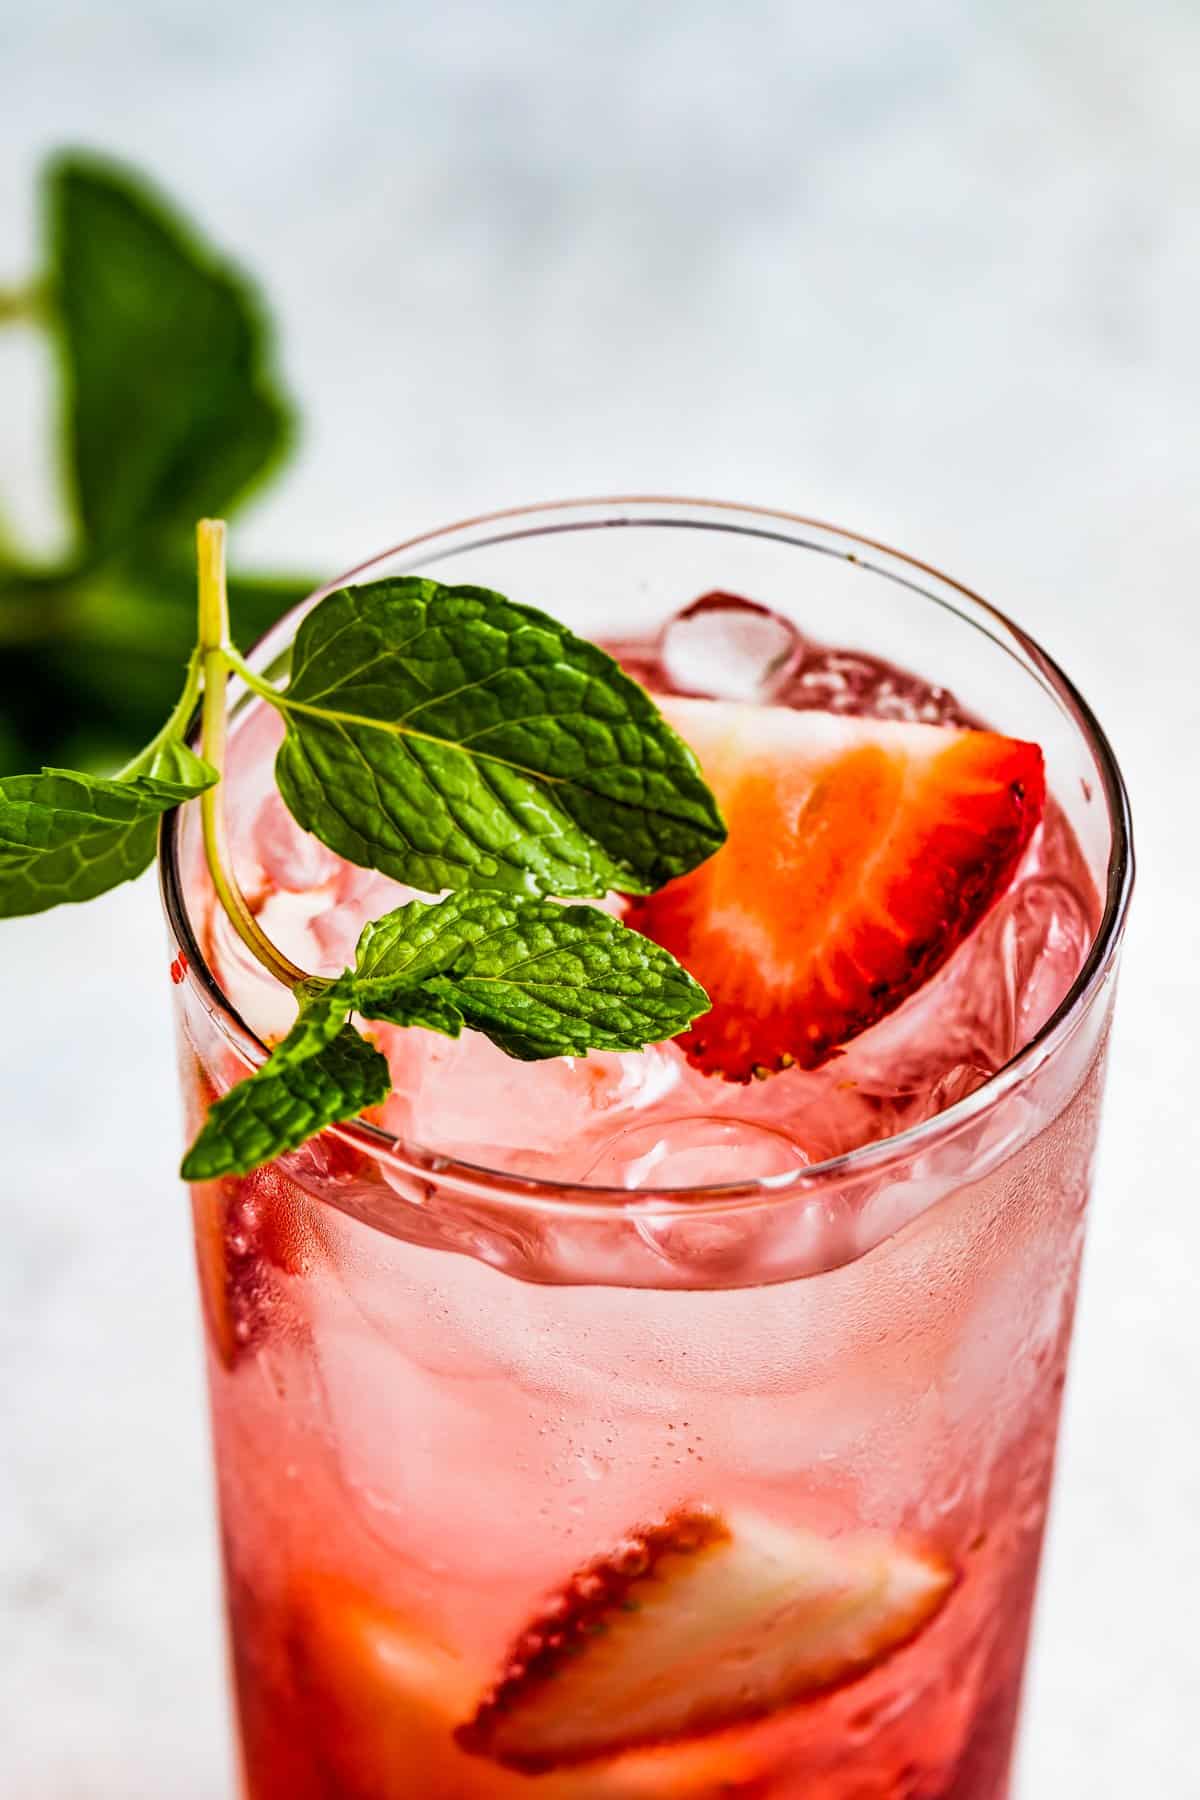 Close-up of a drinking glass filled with iced tea, strawberries, and a garnish of mint.